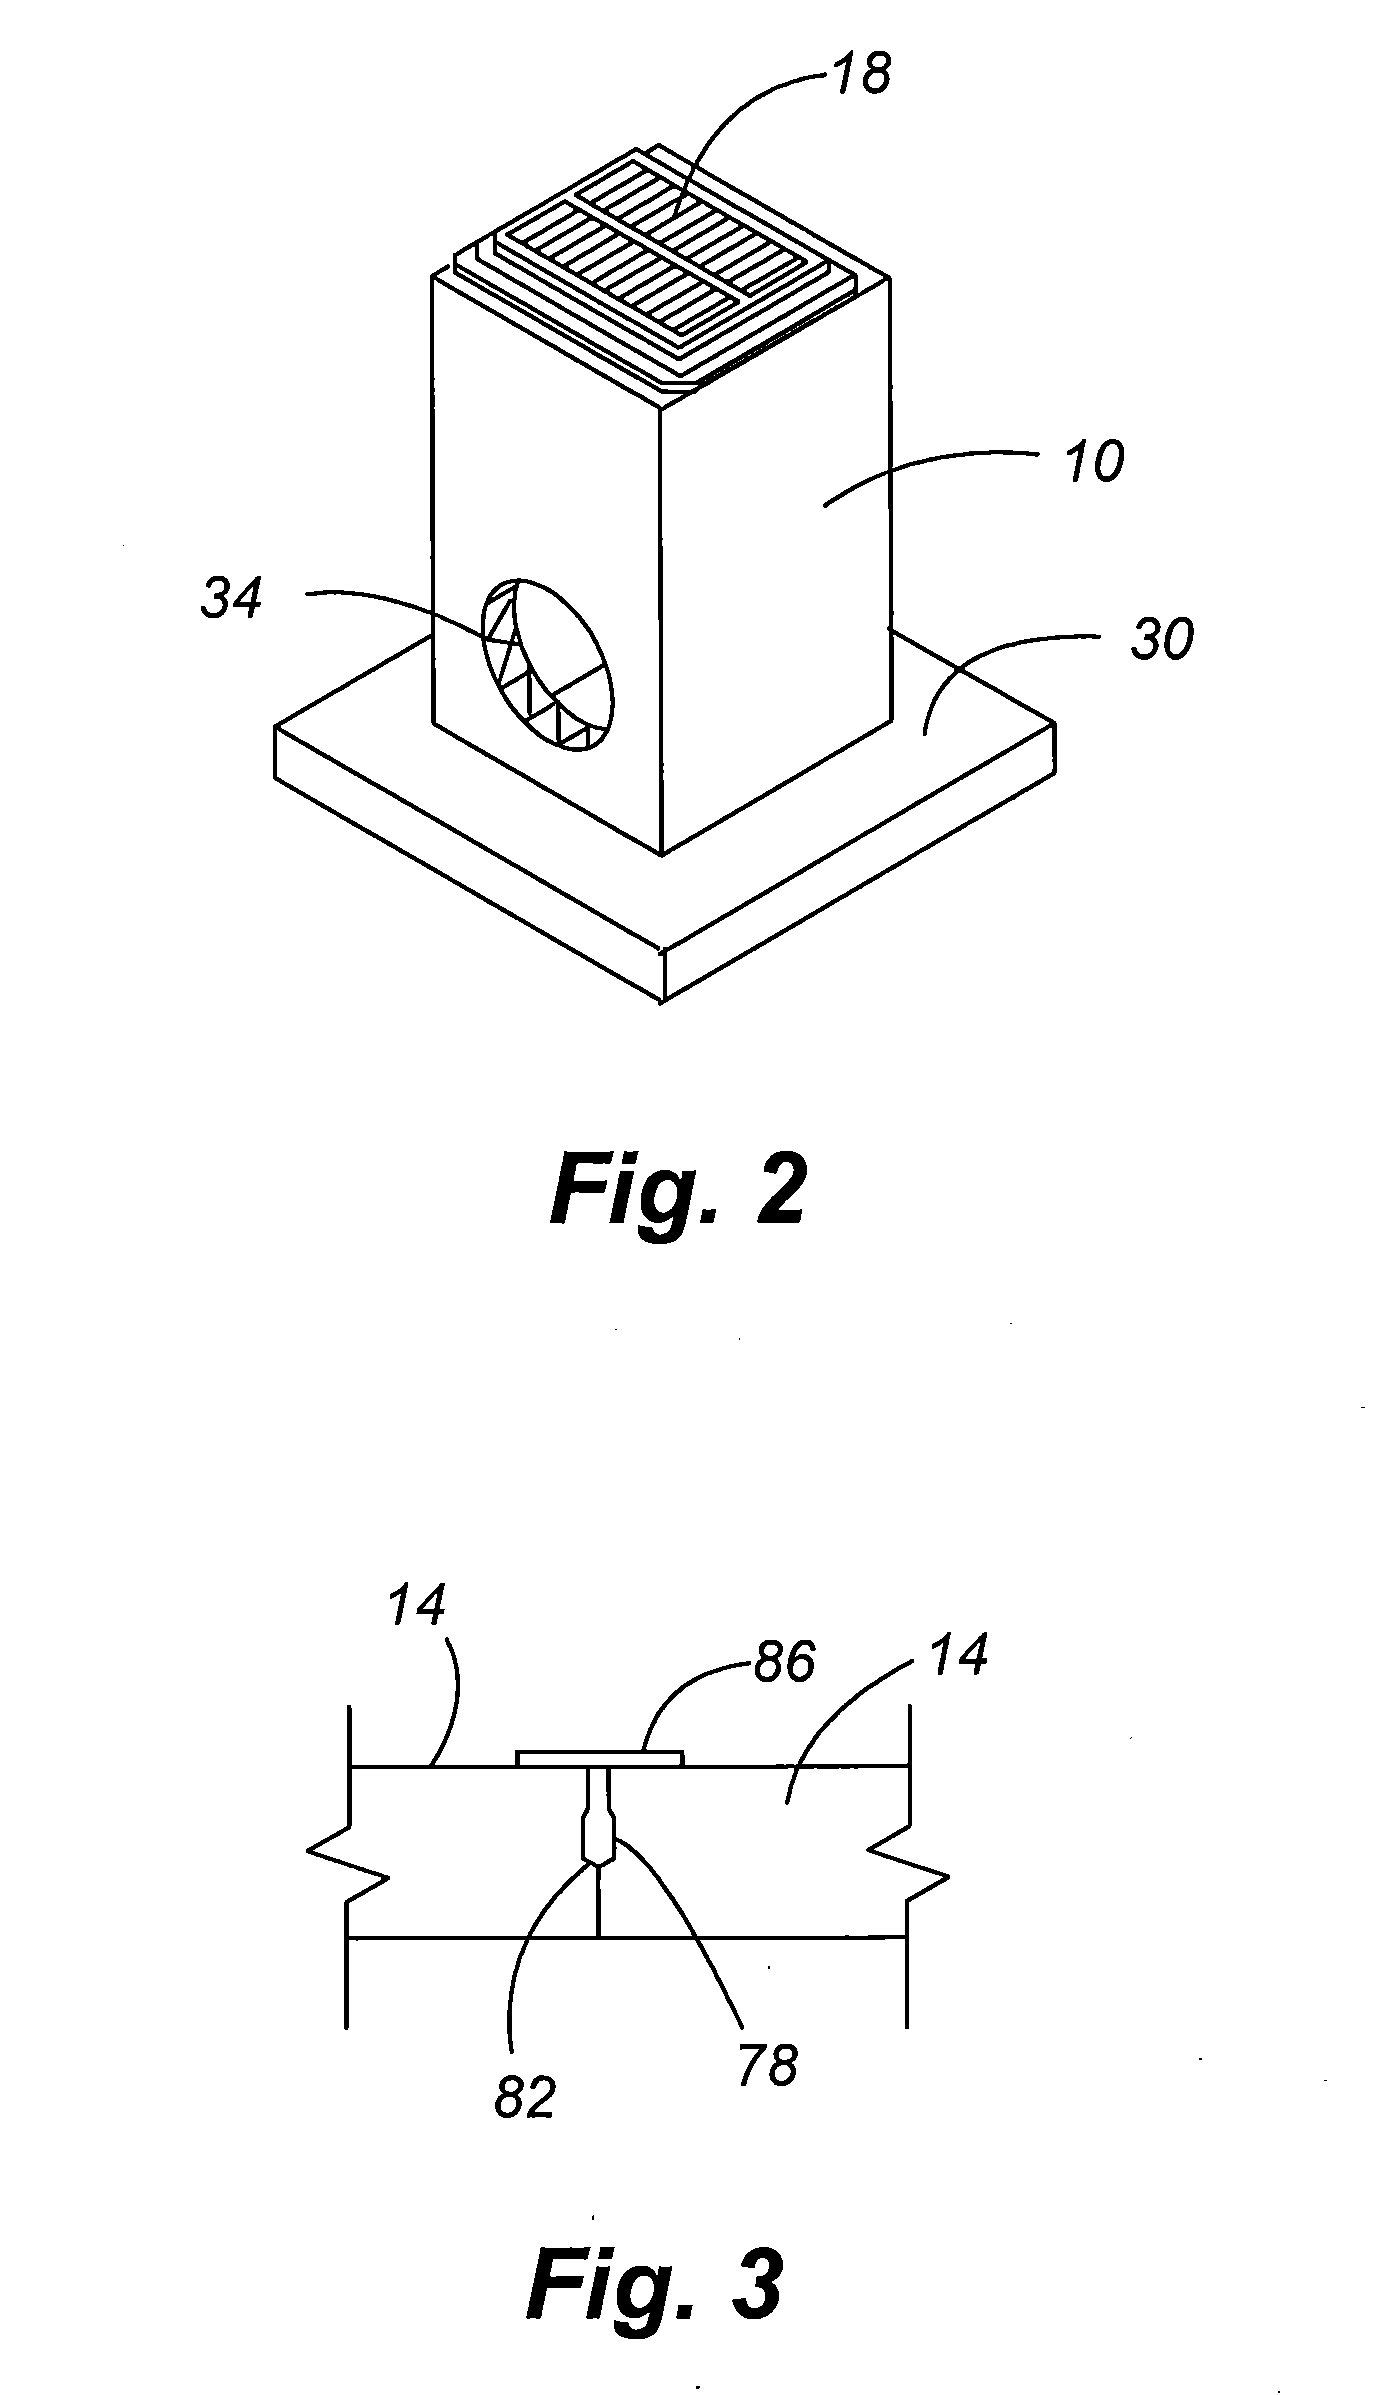 Method and Apparatus for Capturing, Storing, and Distributing Storm Water